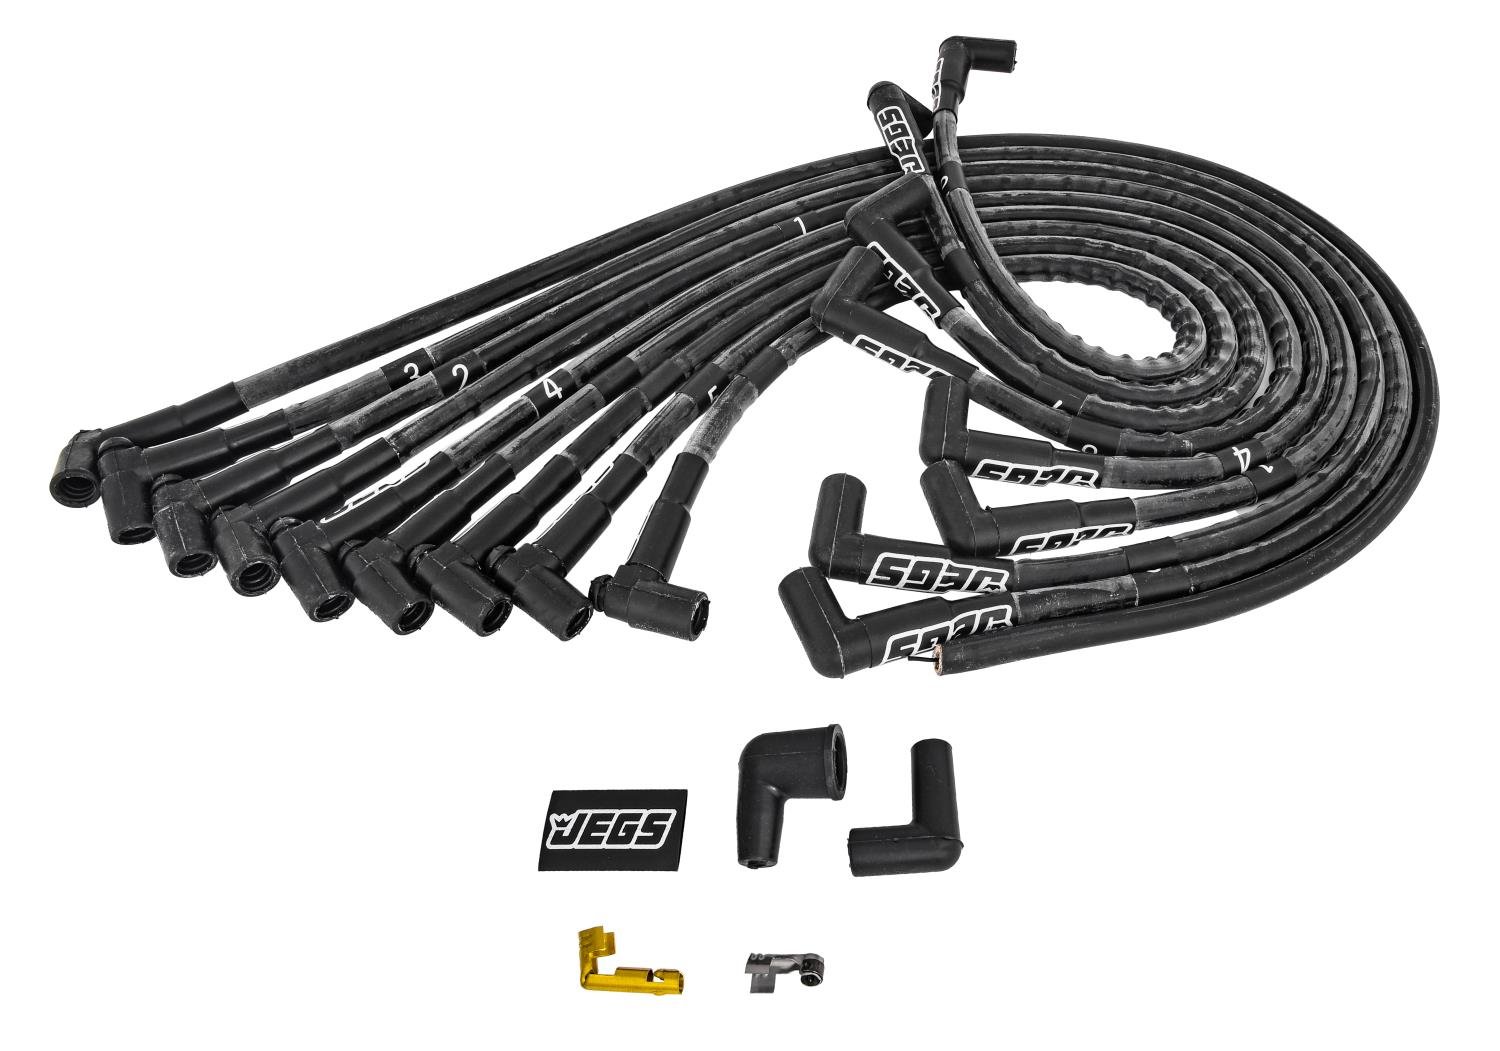 8mm Hi-Temp Sleeved Spark Plug Wire Set for Small Block Chevy 262-400 w/HEI, Under Header w/90-degree Boots [Black]